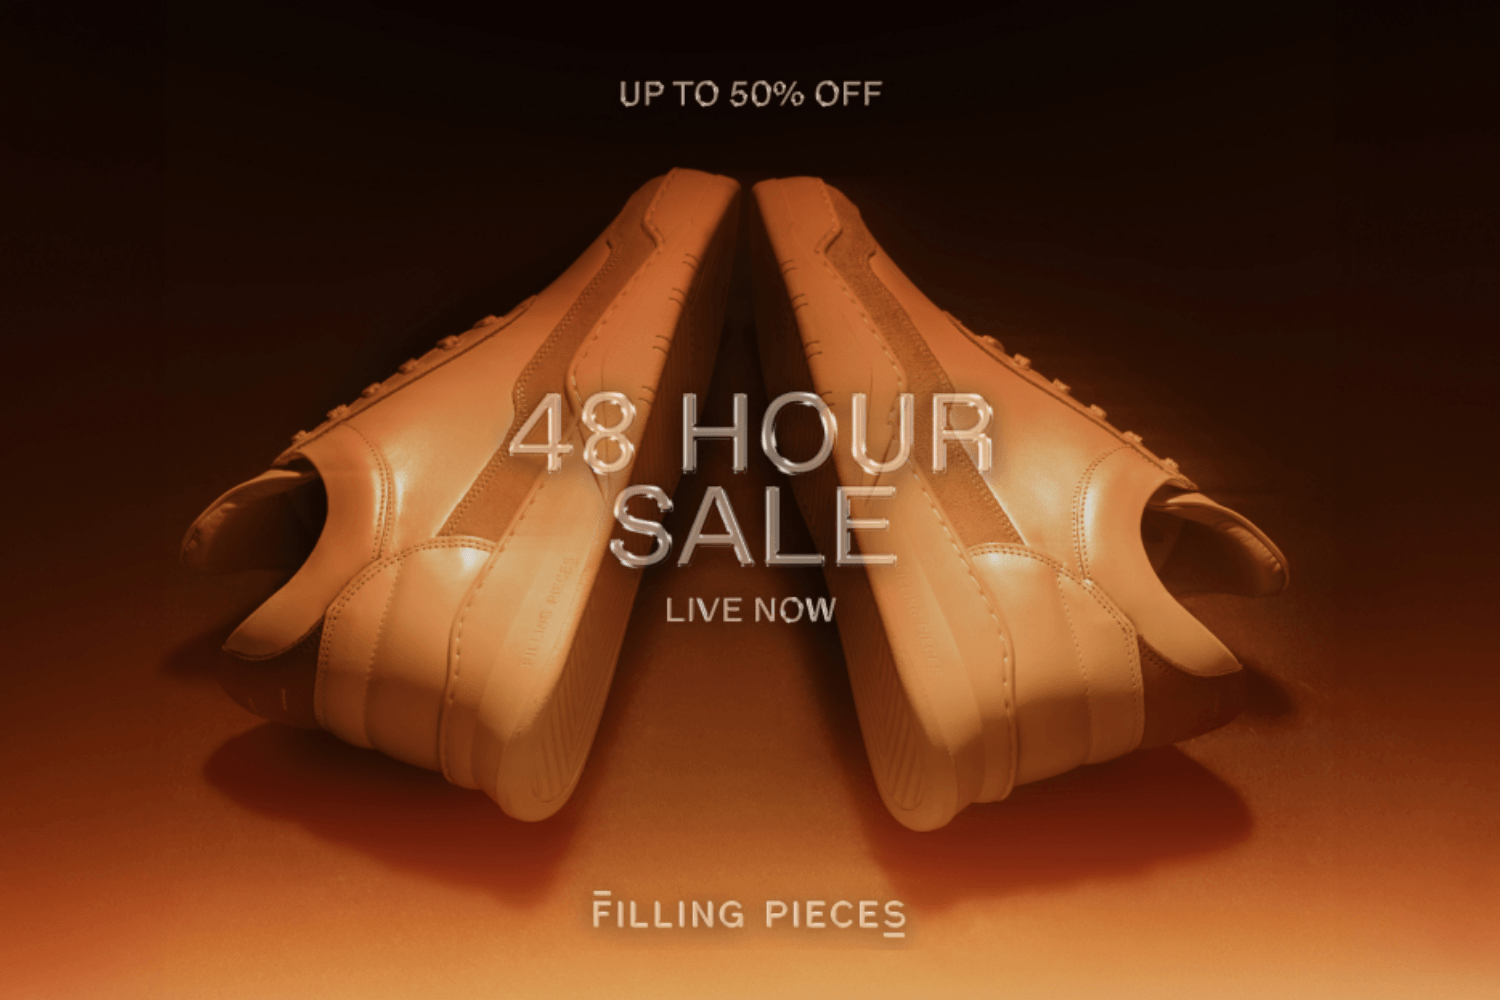 Only for a short time! Save up to 50% off in the Filling Pieces 48 Hour Sale